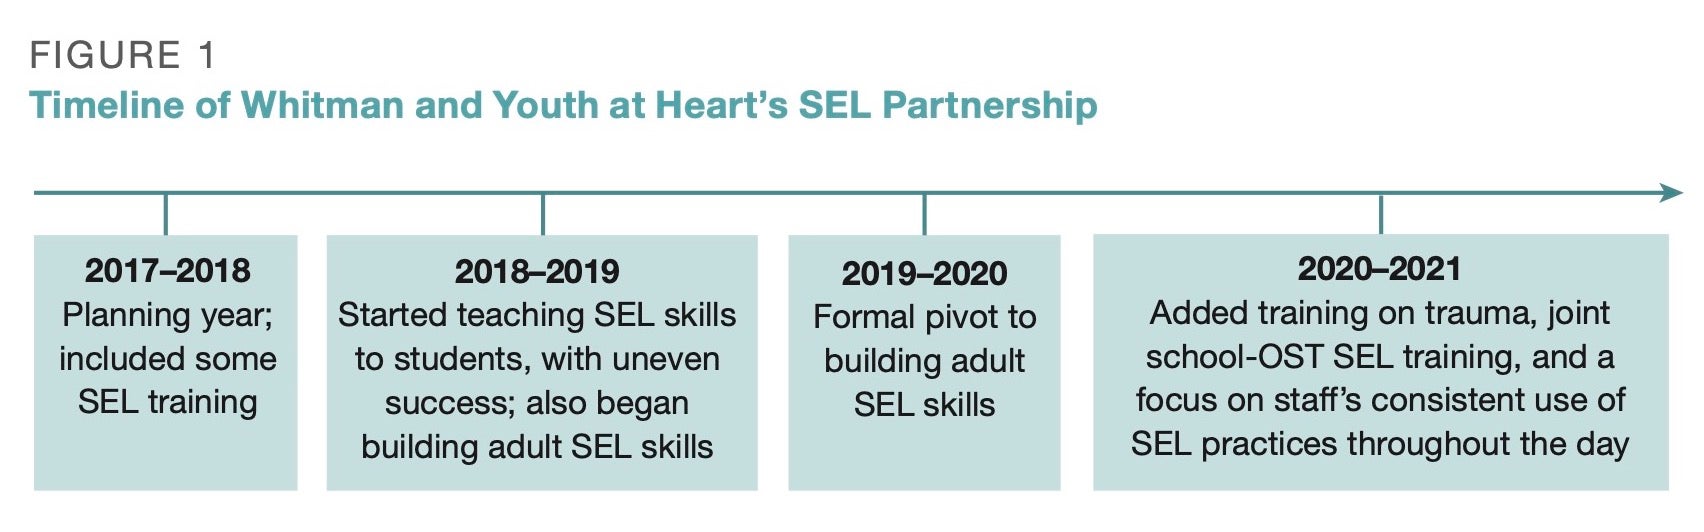 Timeline of Whitman and Youth at Heart's SEL Partnership